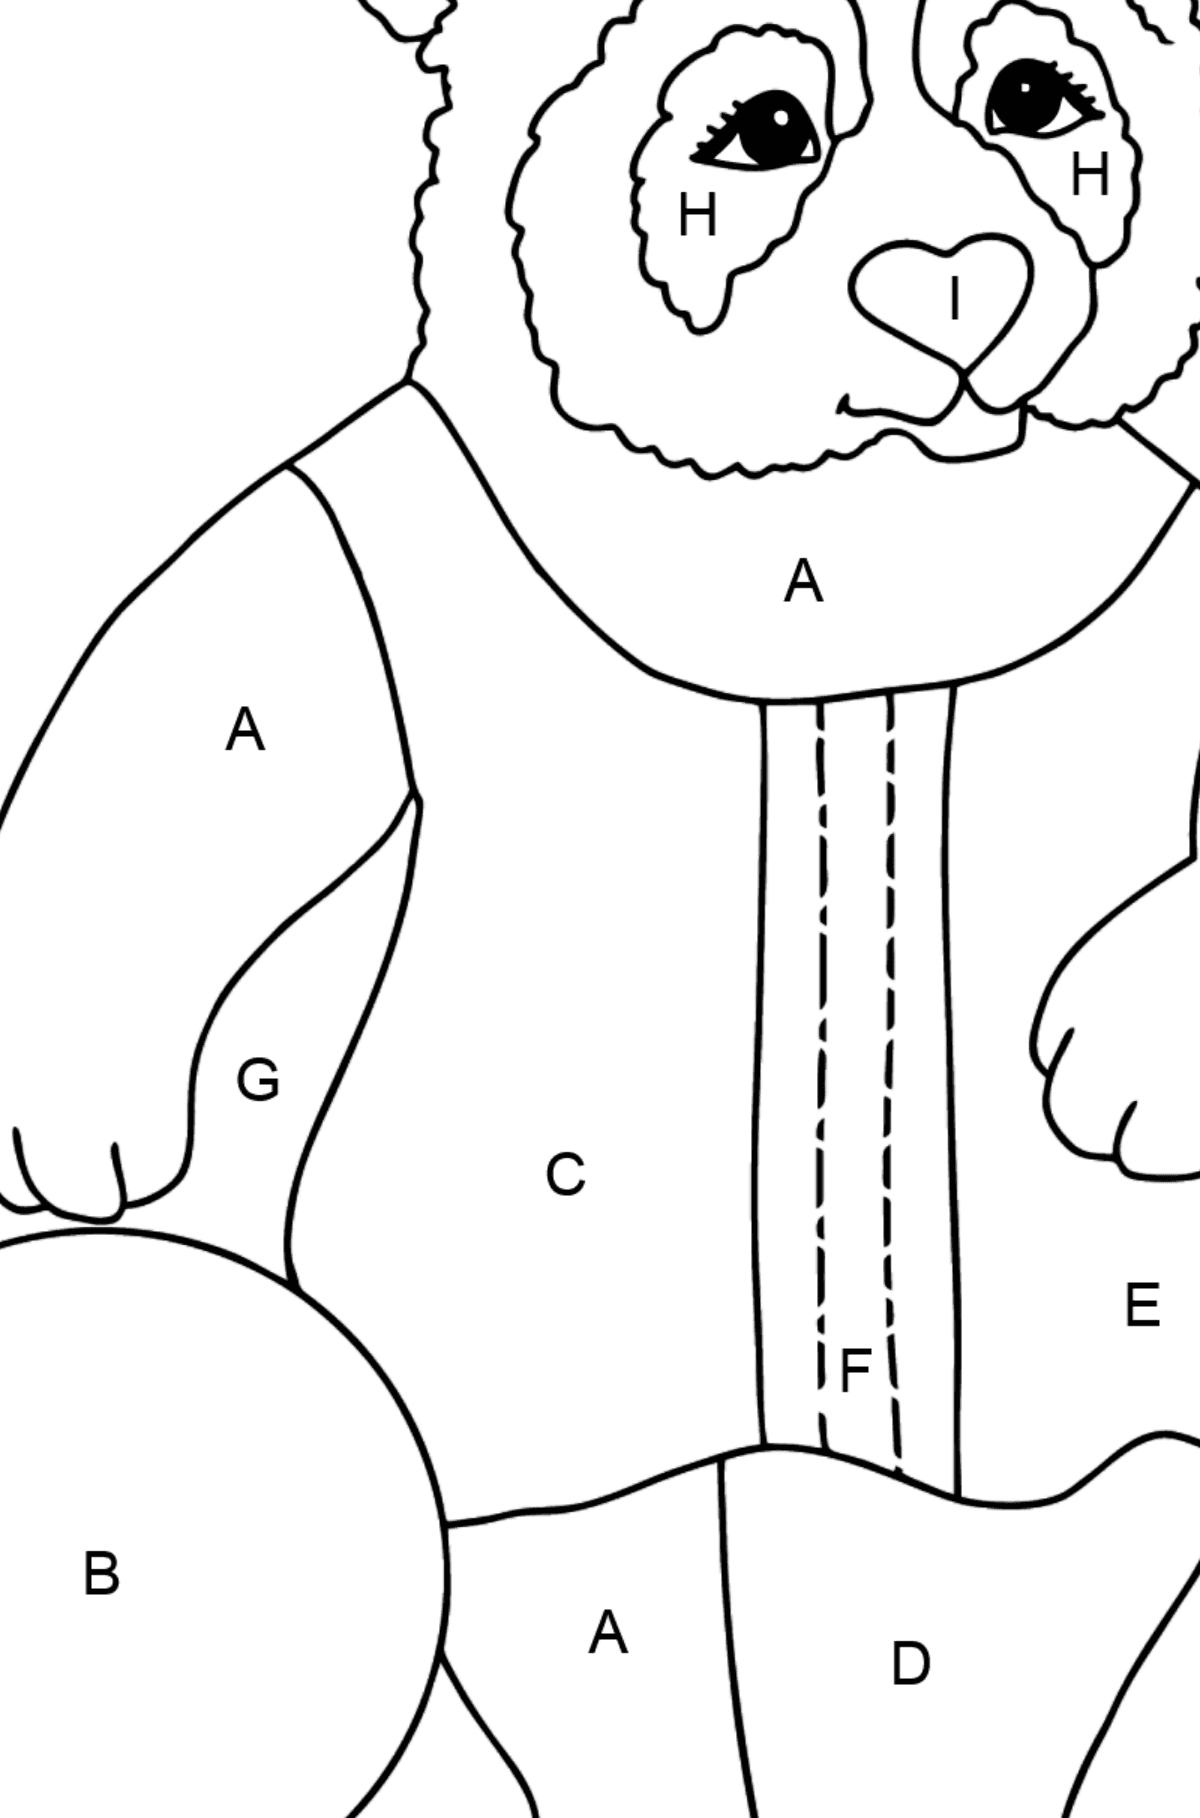 Panda For Babies coloring page - Coloring by Letters for Kids